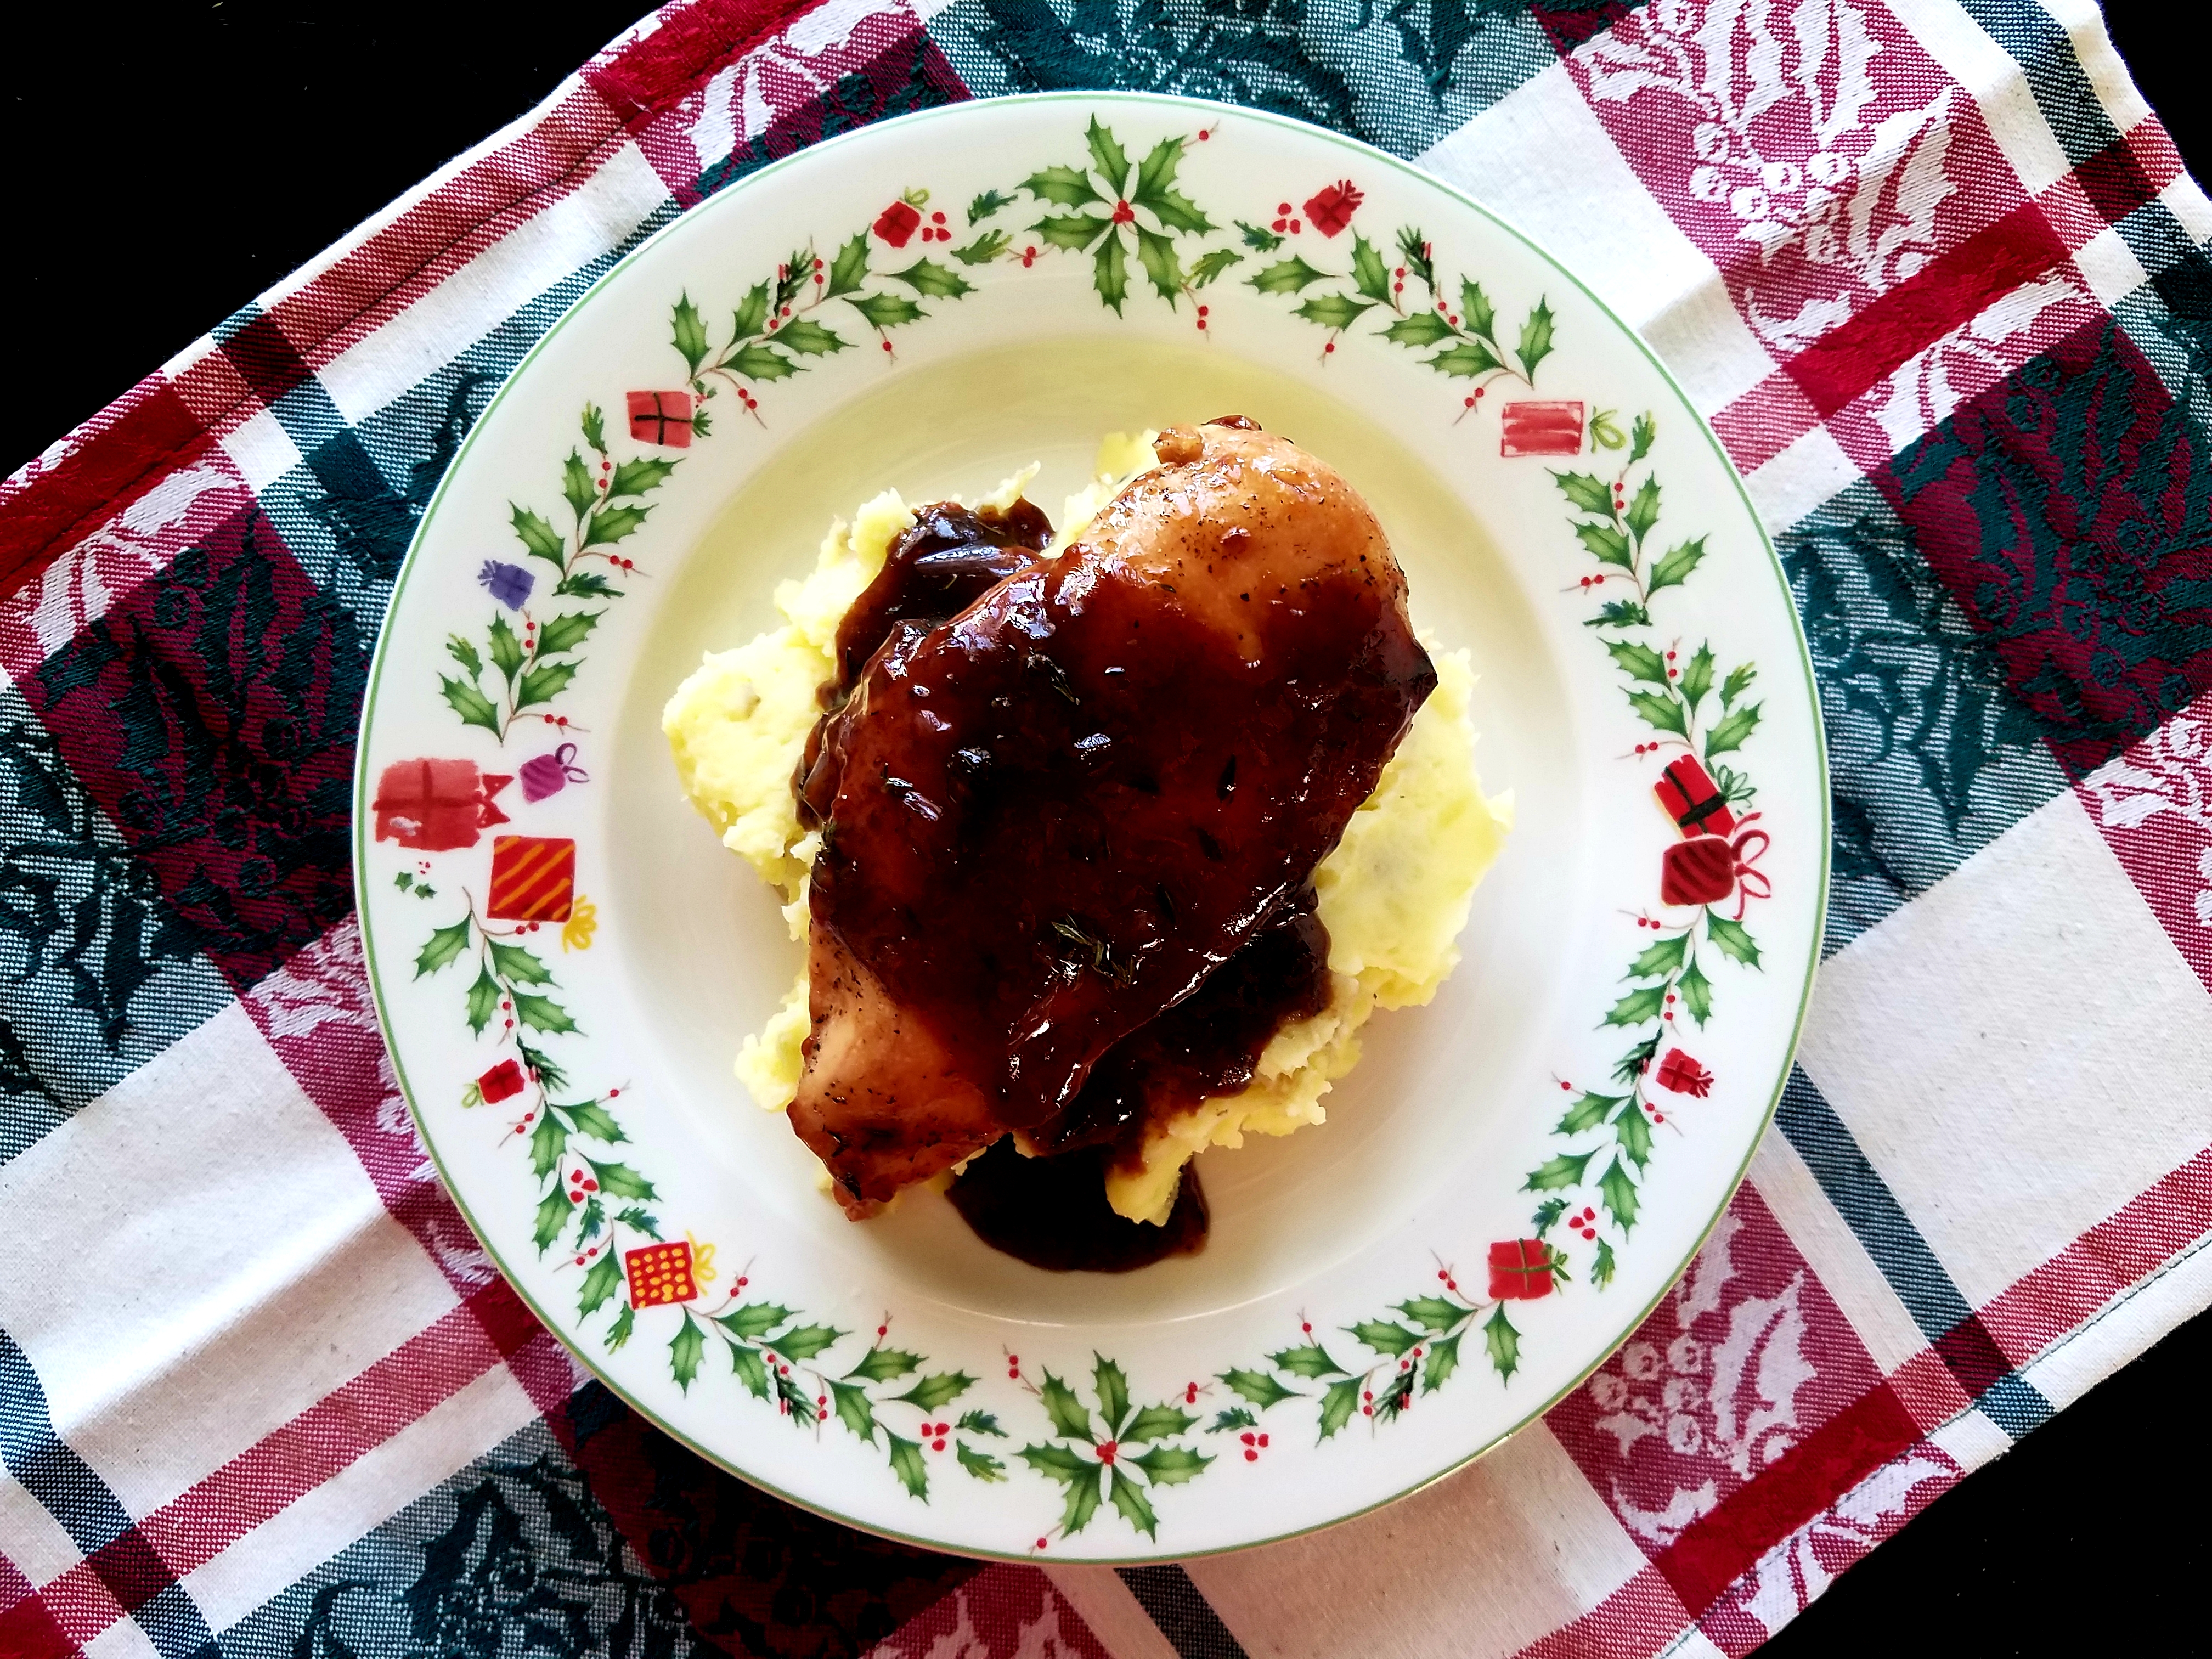 Raspberry Thyme Chicken (Recipe inspired by MEET ME AT THE MUSEUM)